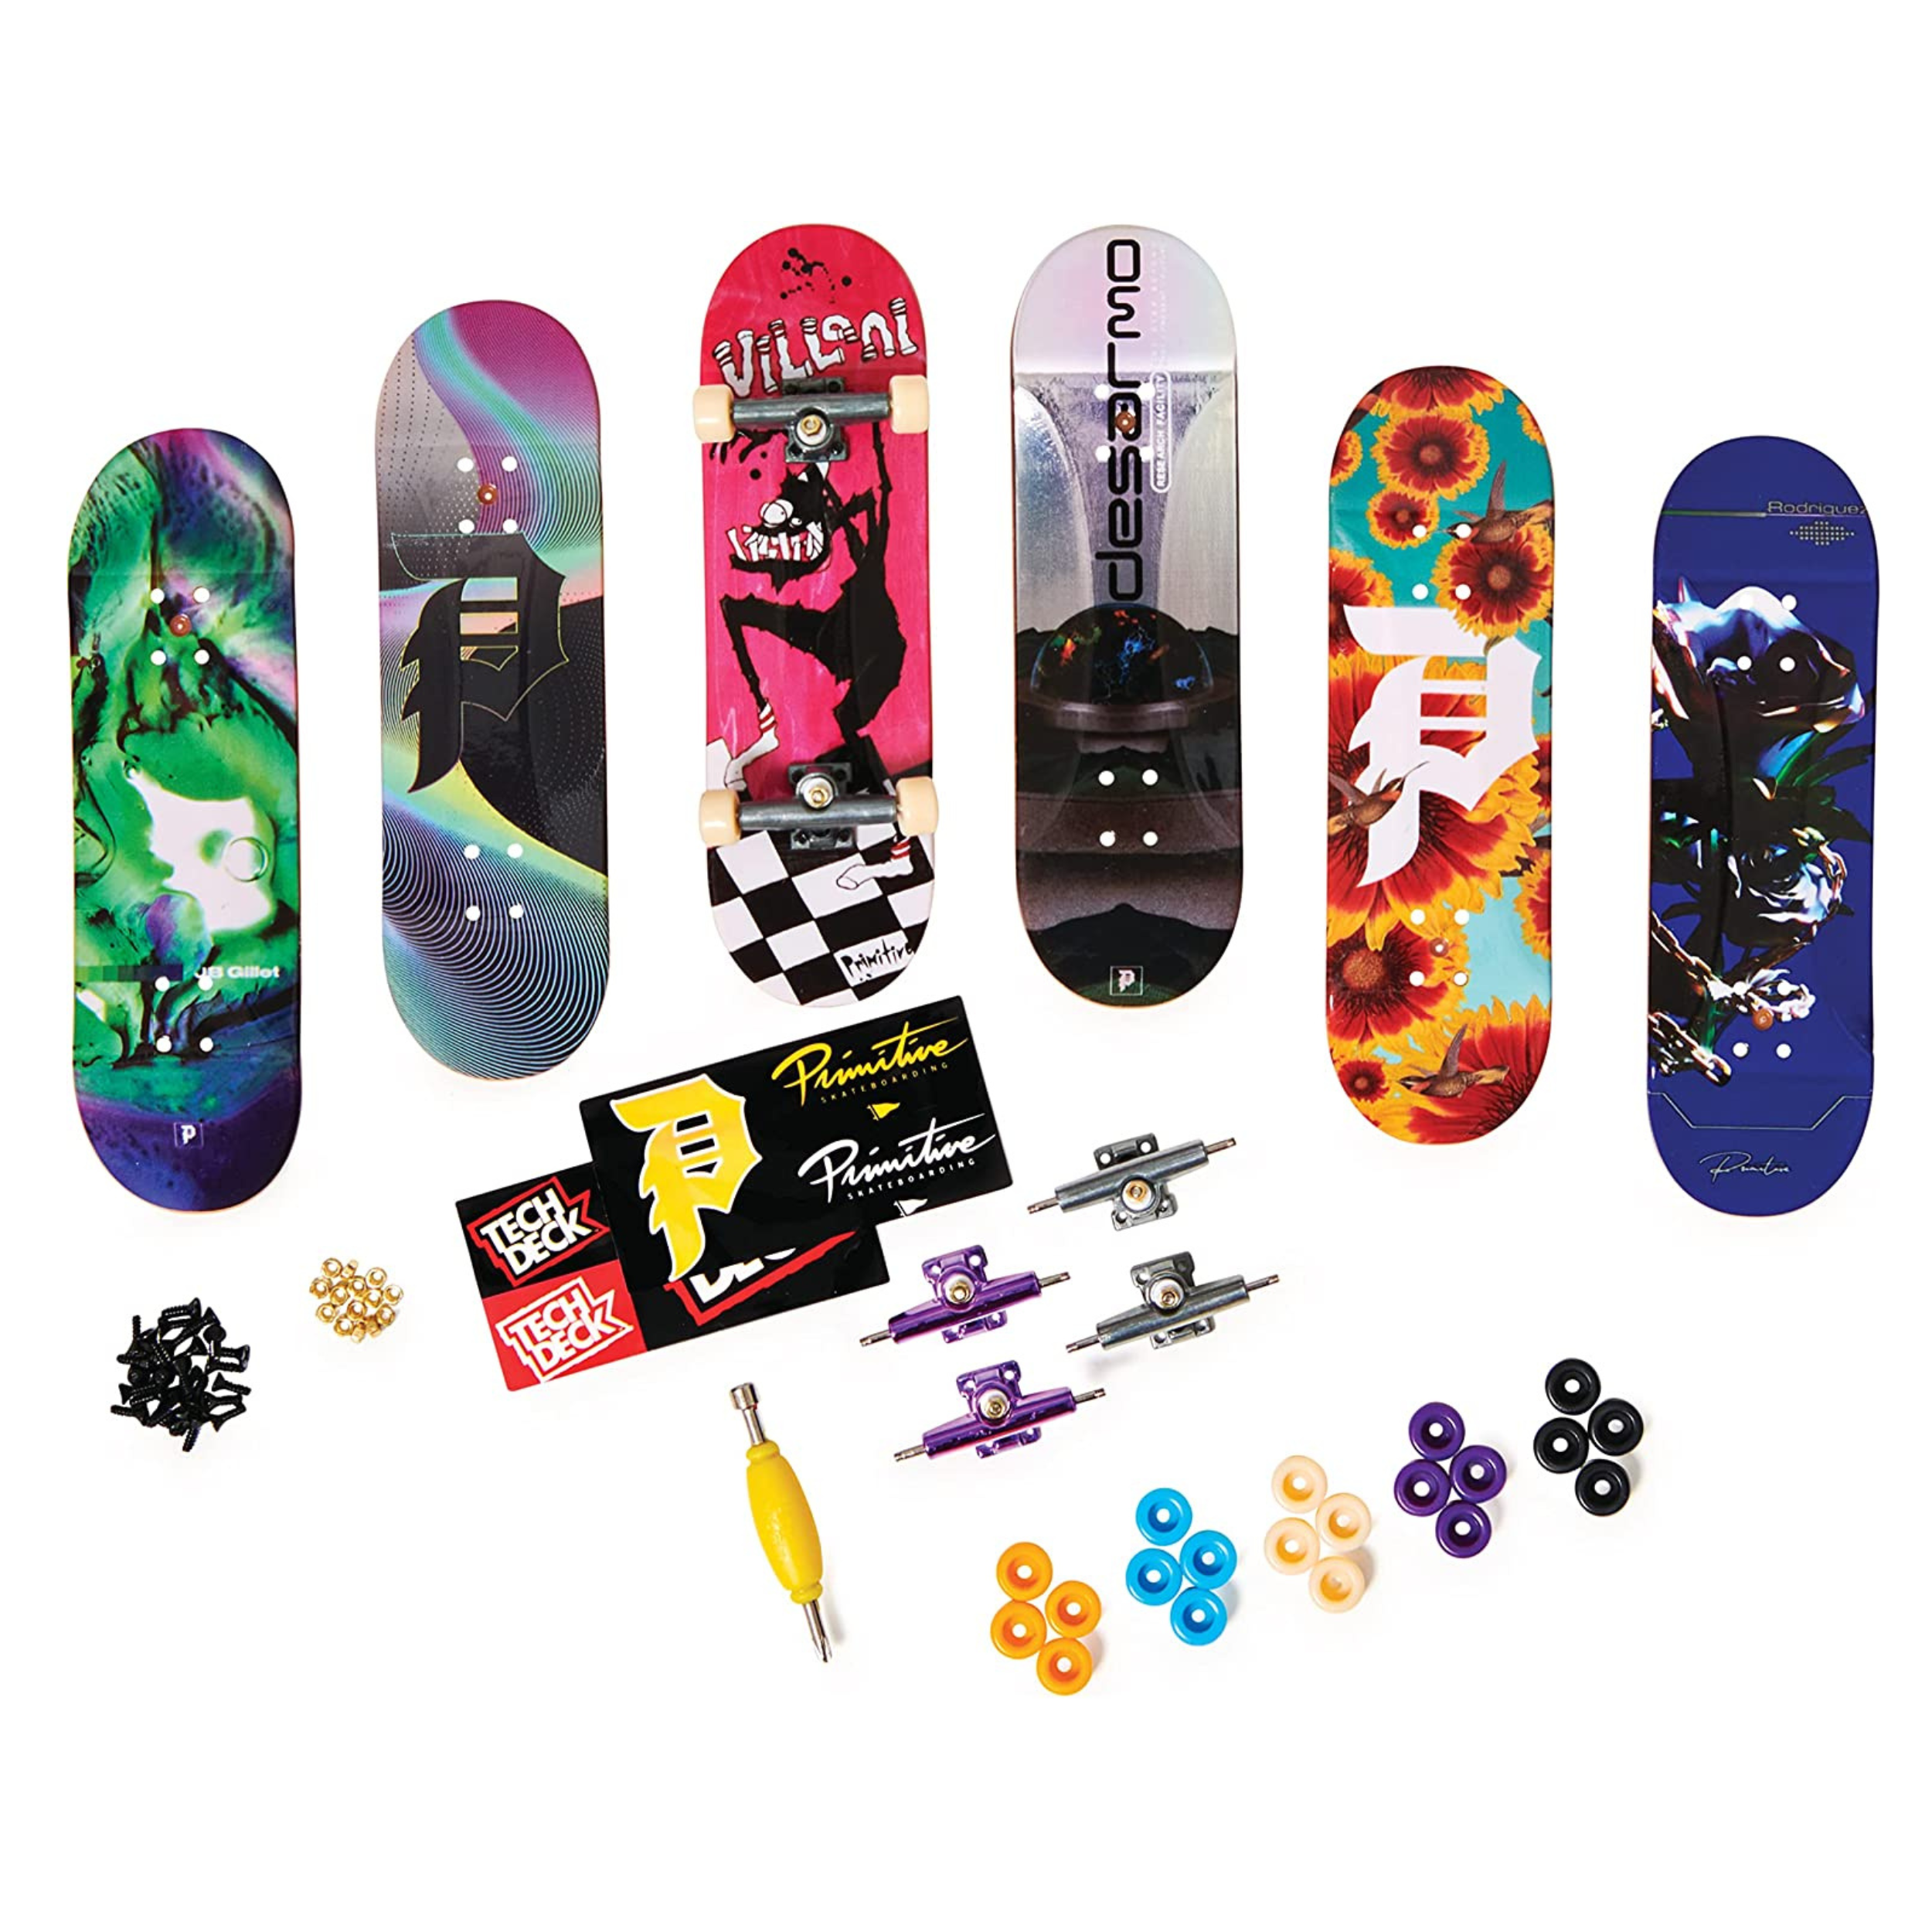 SPIN MASTER - Tech Deck , Sk8shop Fingerboard Bonus Pack, Collectible and Customizable Mini Skateboards (Styles May Vary)